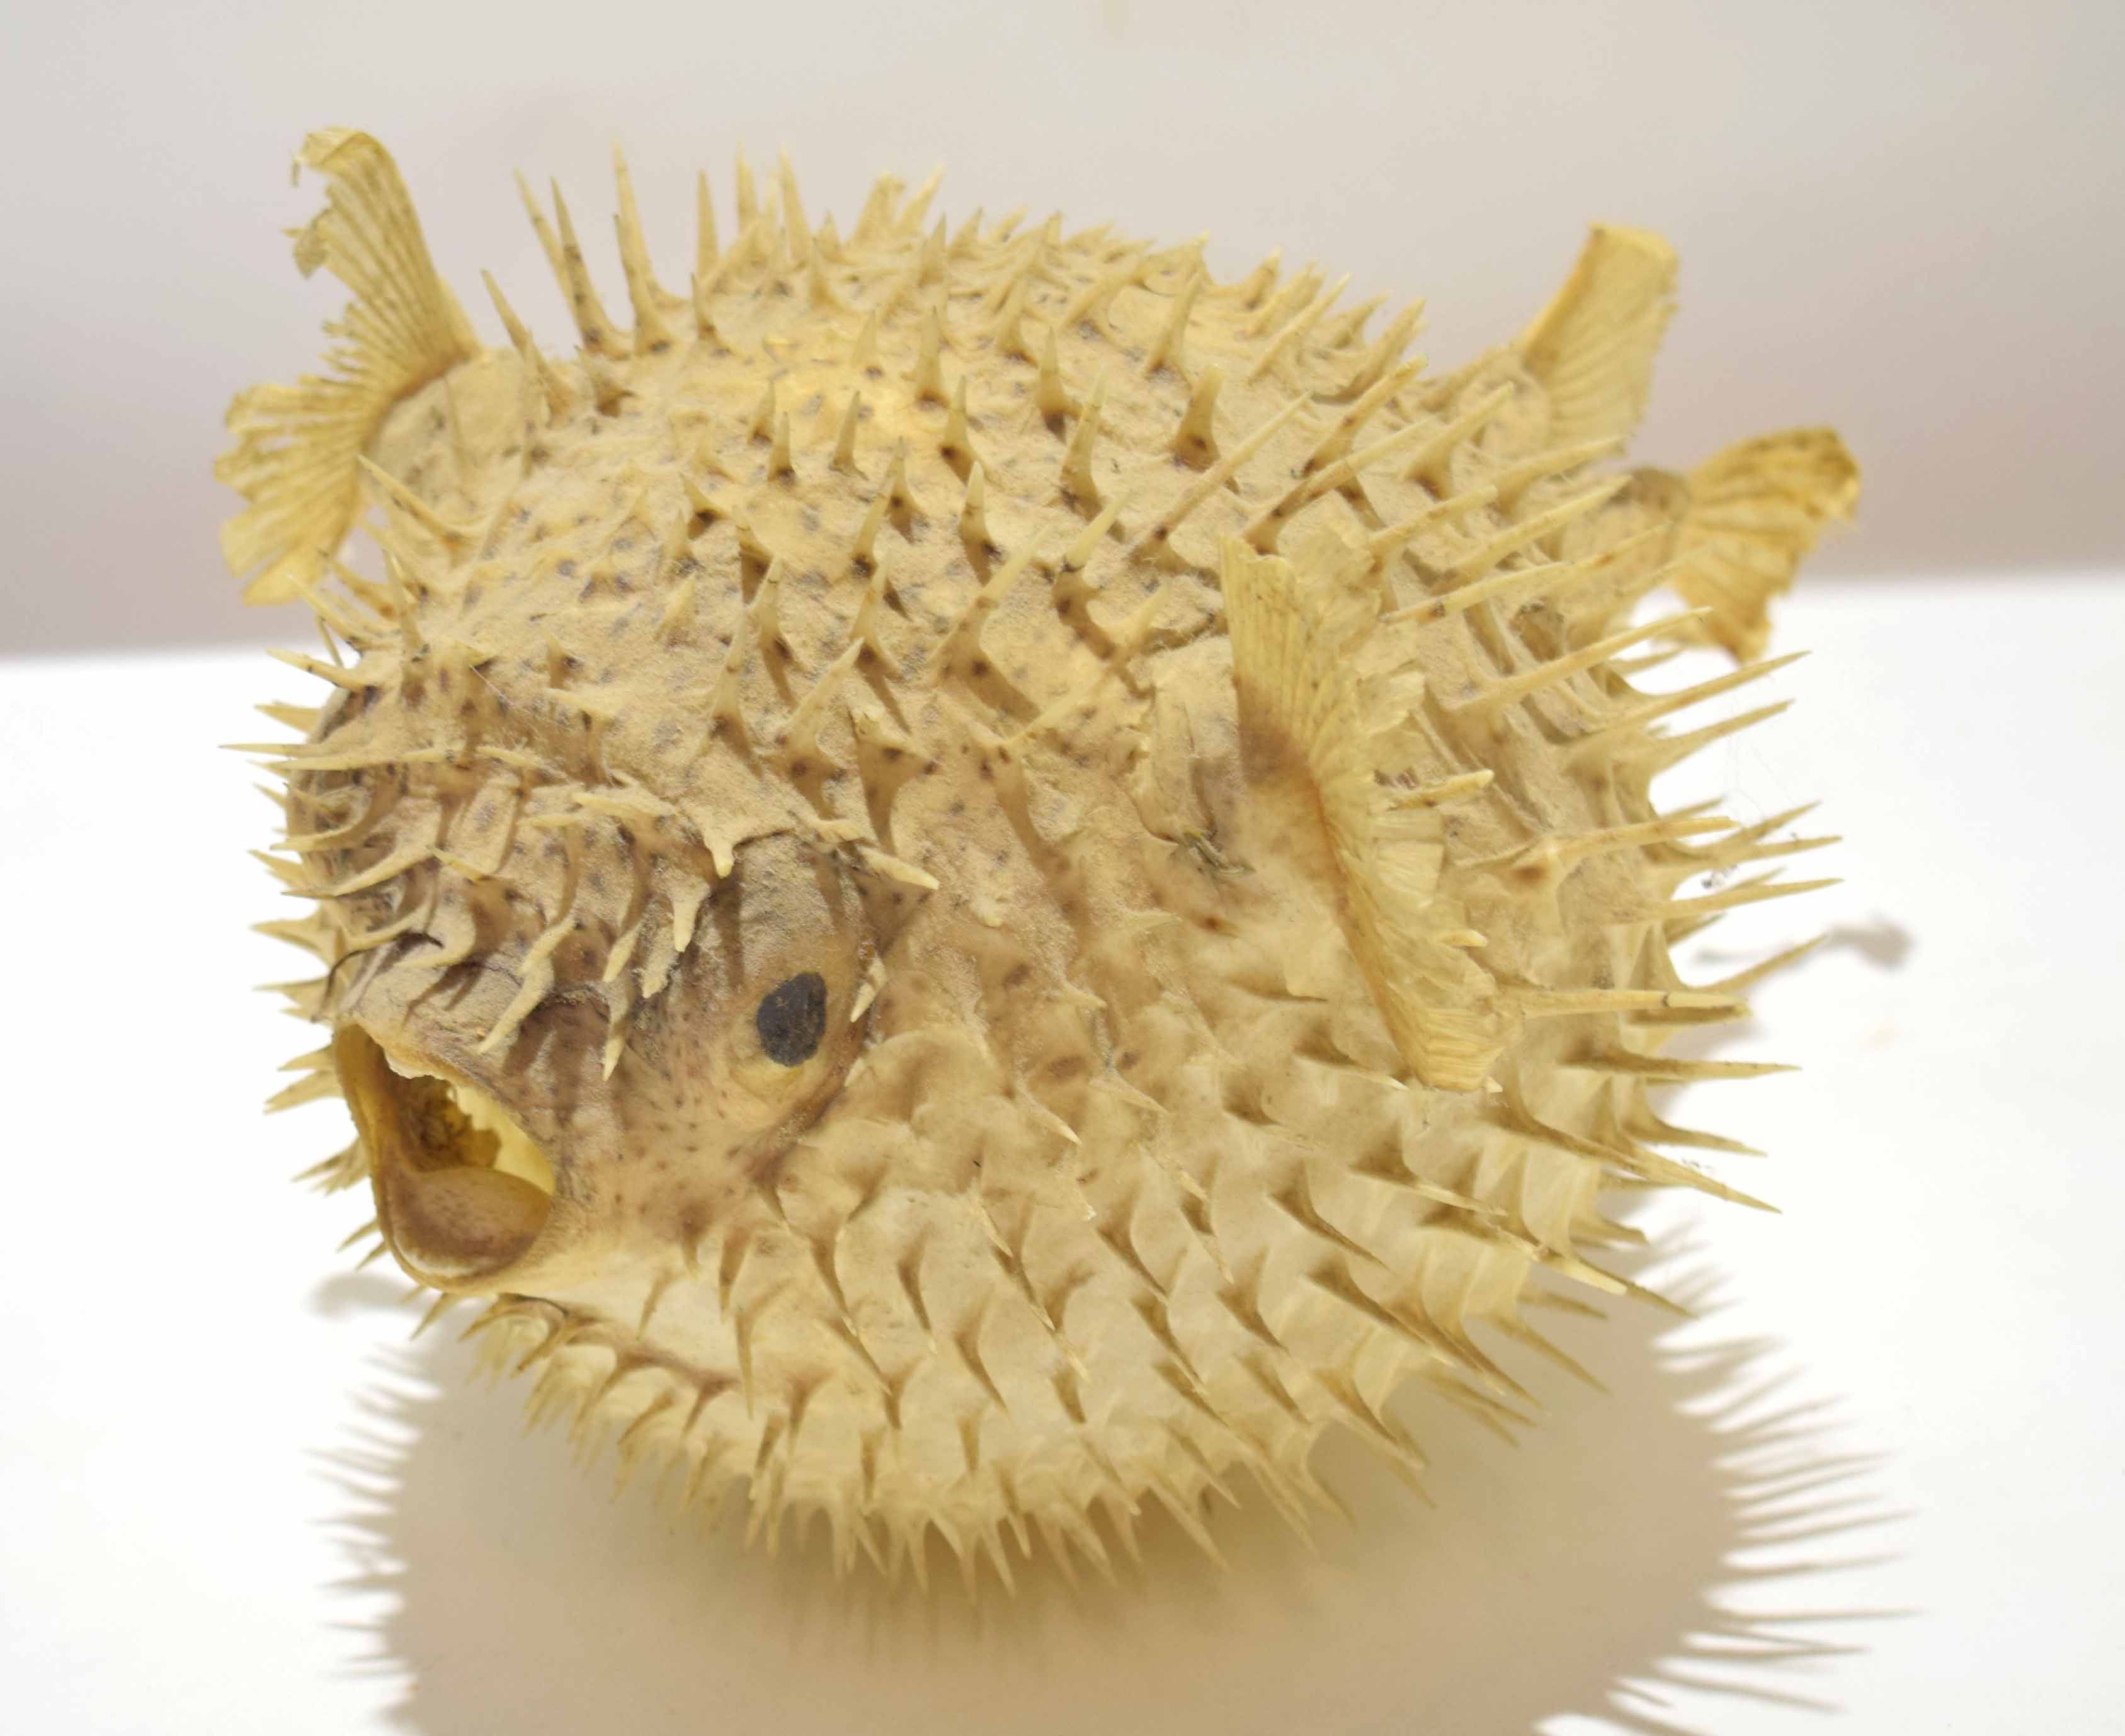 Skeleton of a puffer fish complete with spines